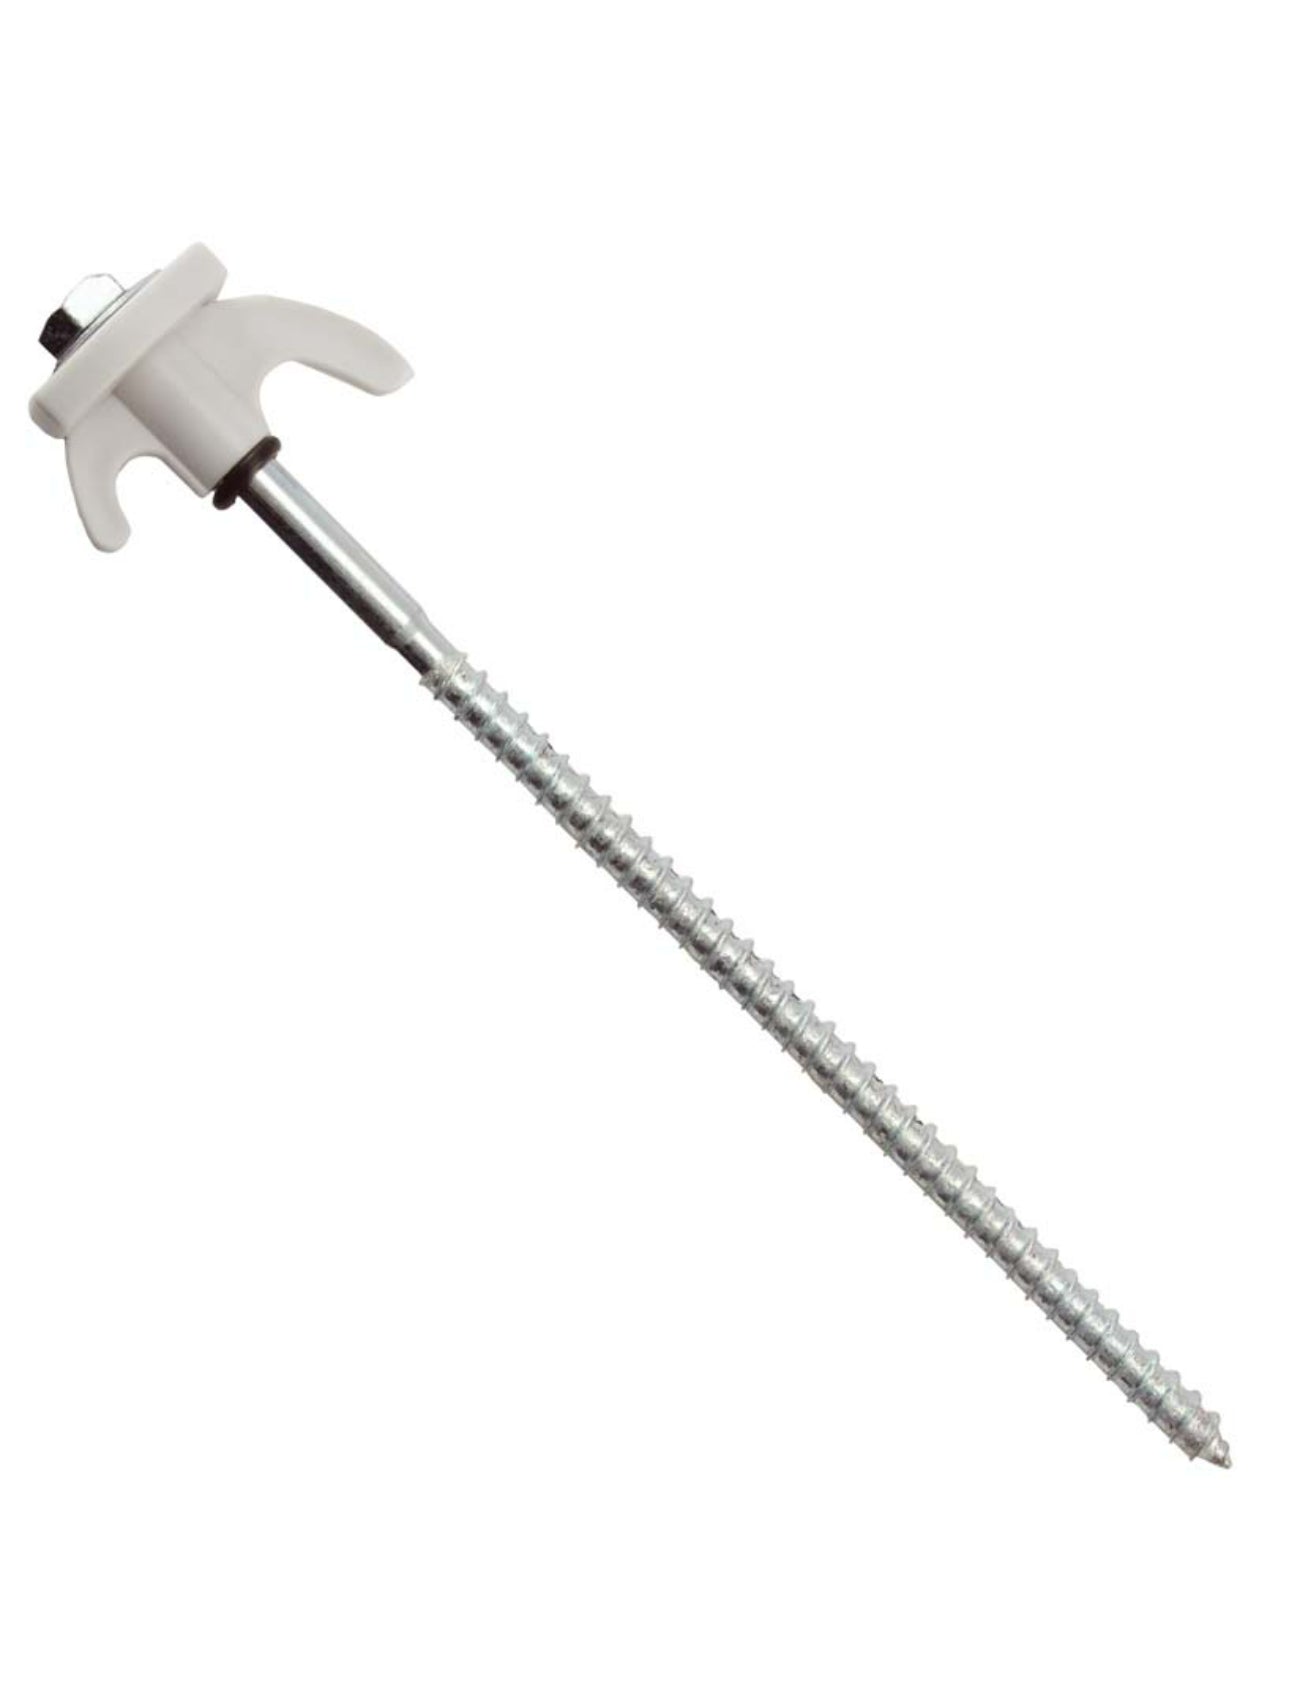 METAL PEG WITH HEX HEAD